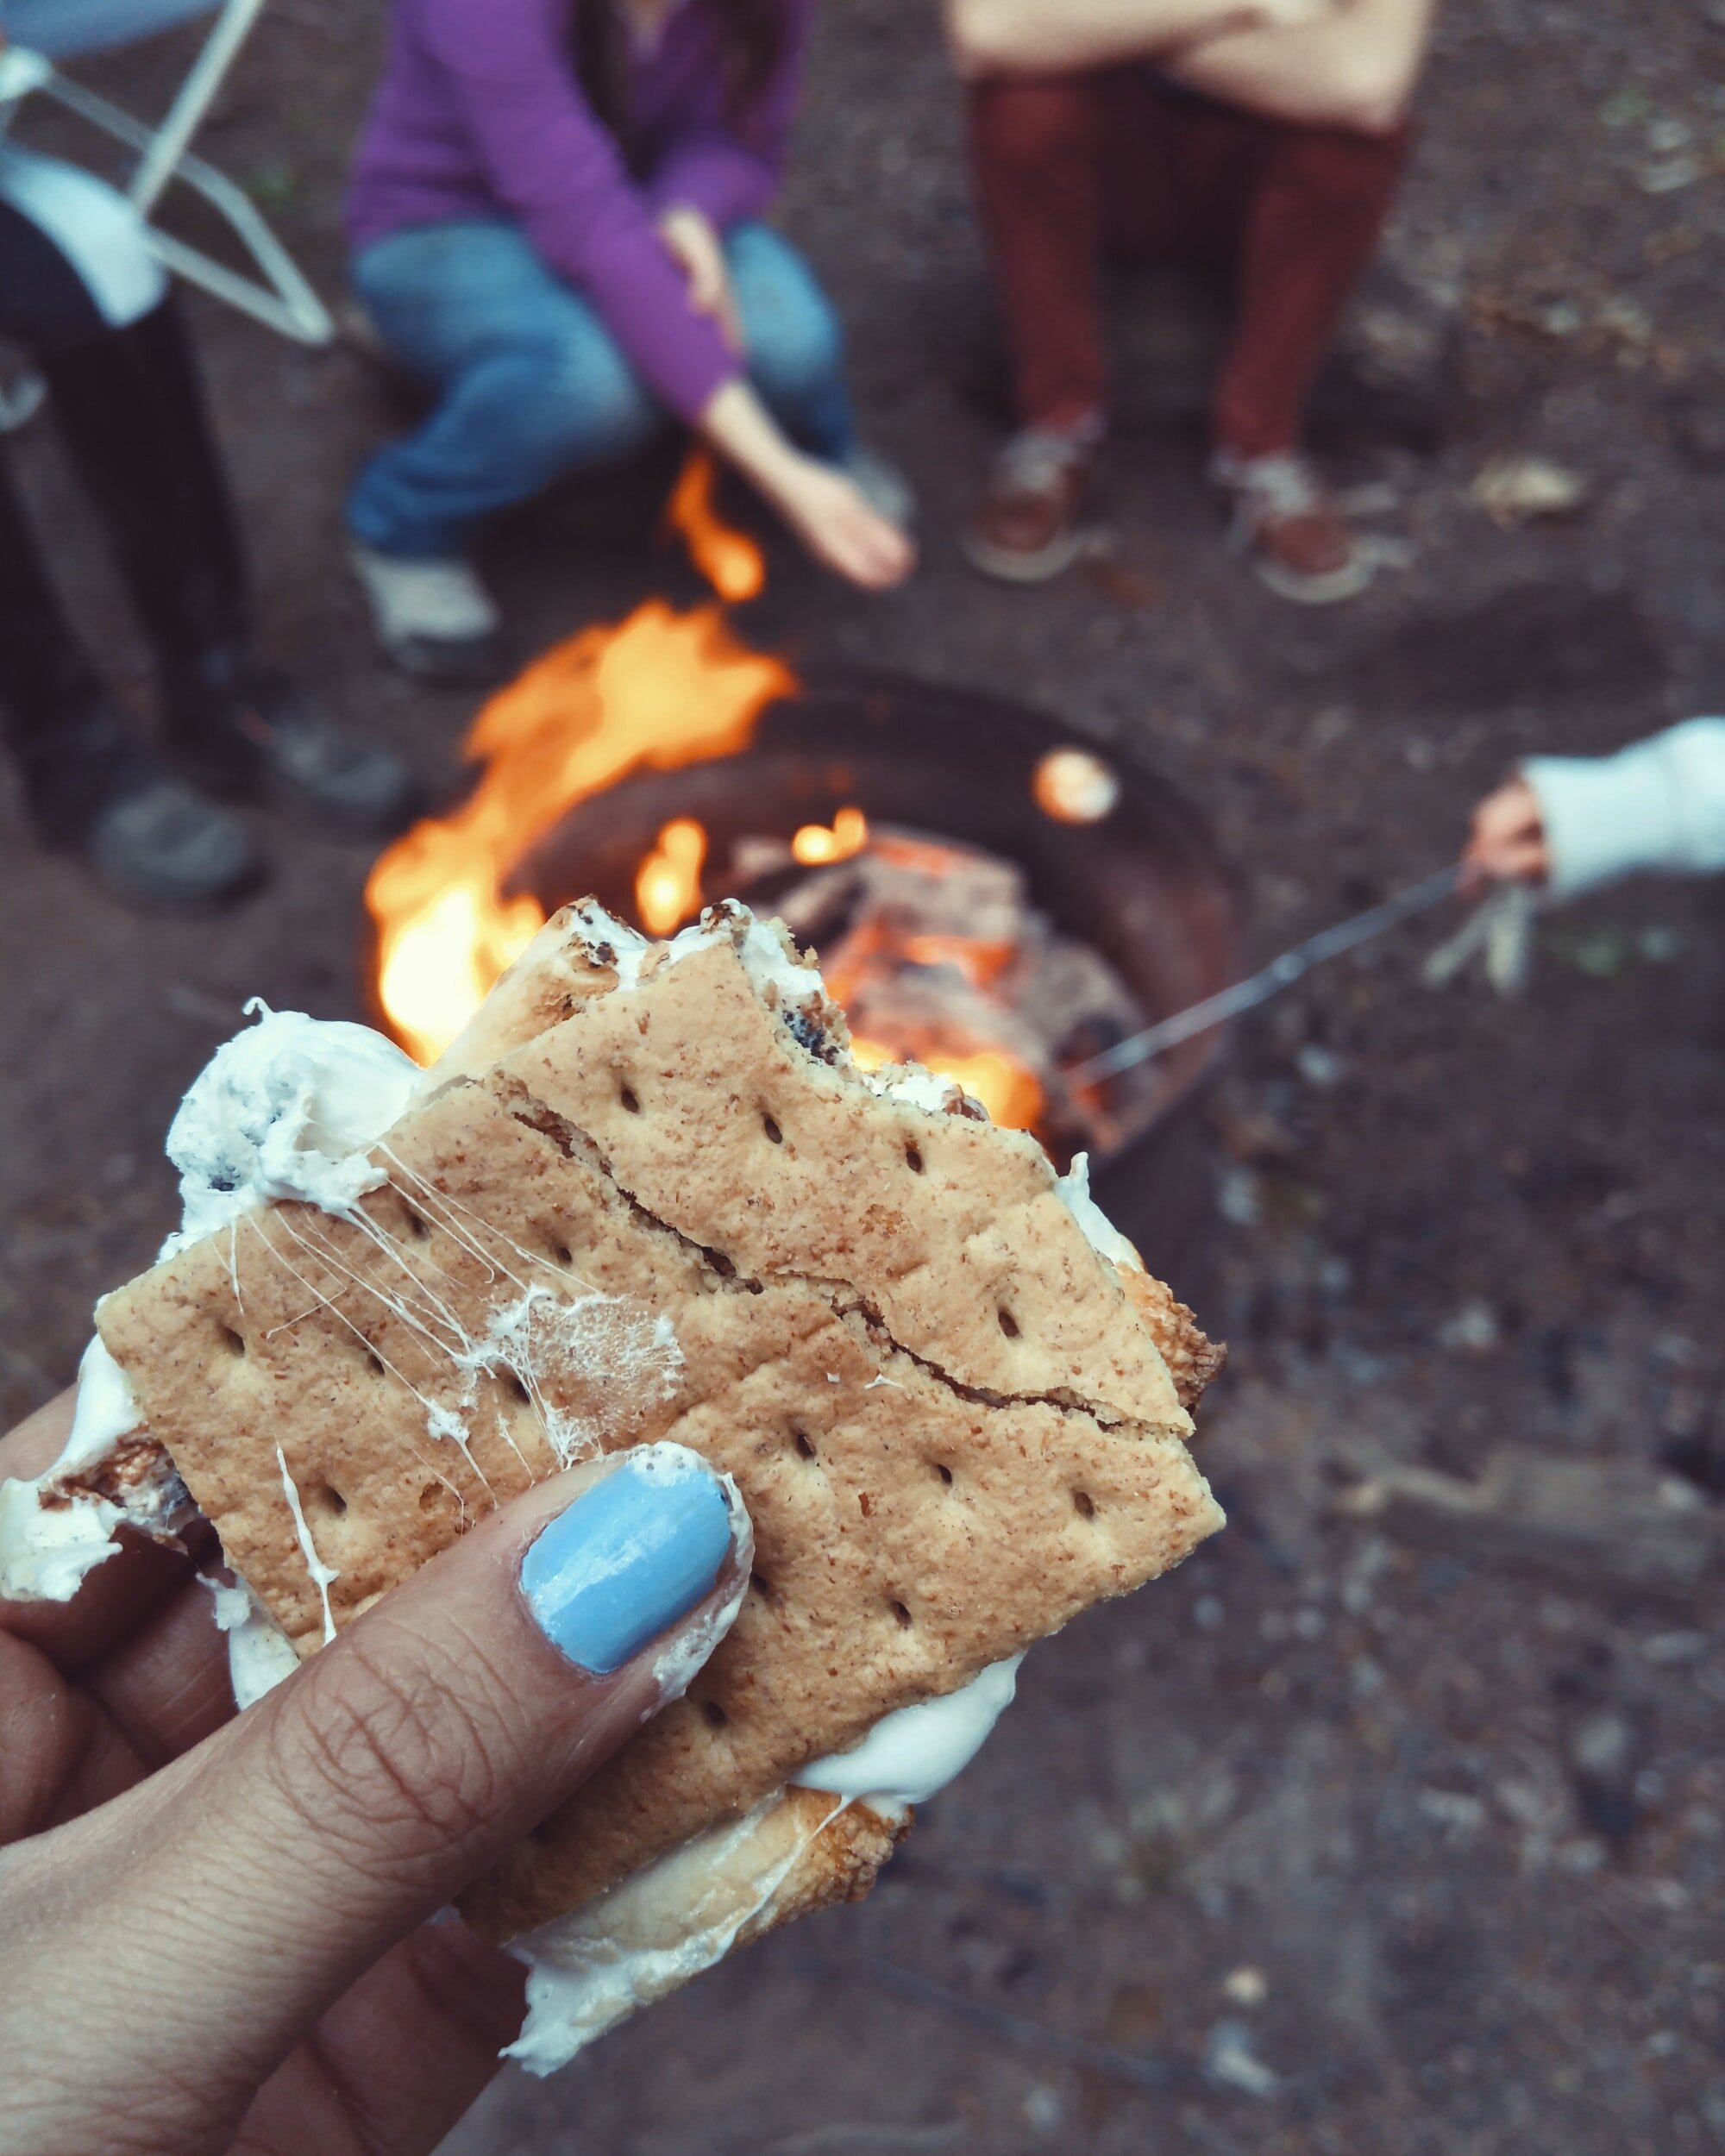 Photo of a person’s hand with blue nail polish holding a cook s’more in front of a fire by Autumn Mott Rodeheaver on Unsplash